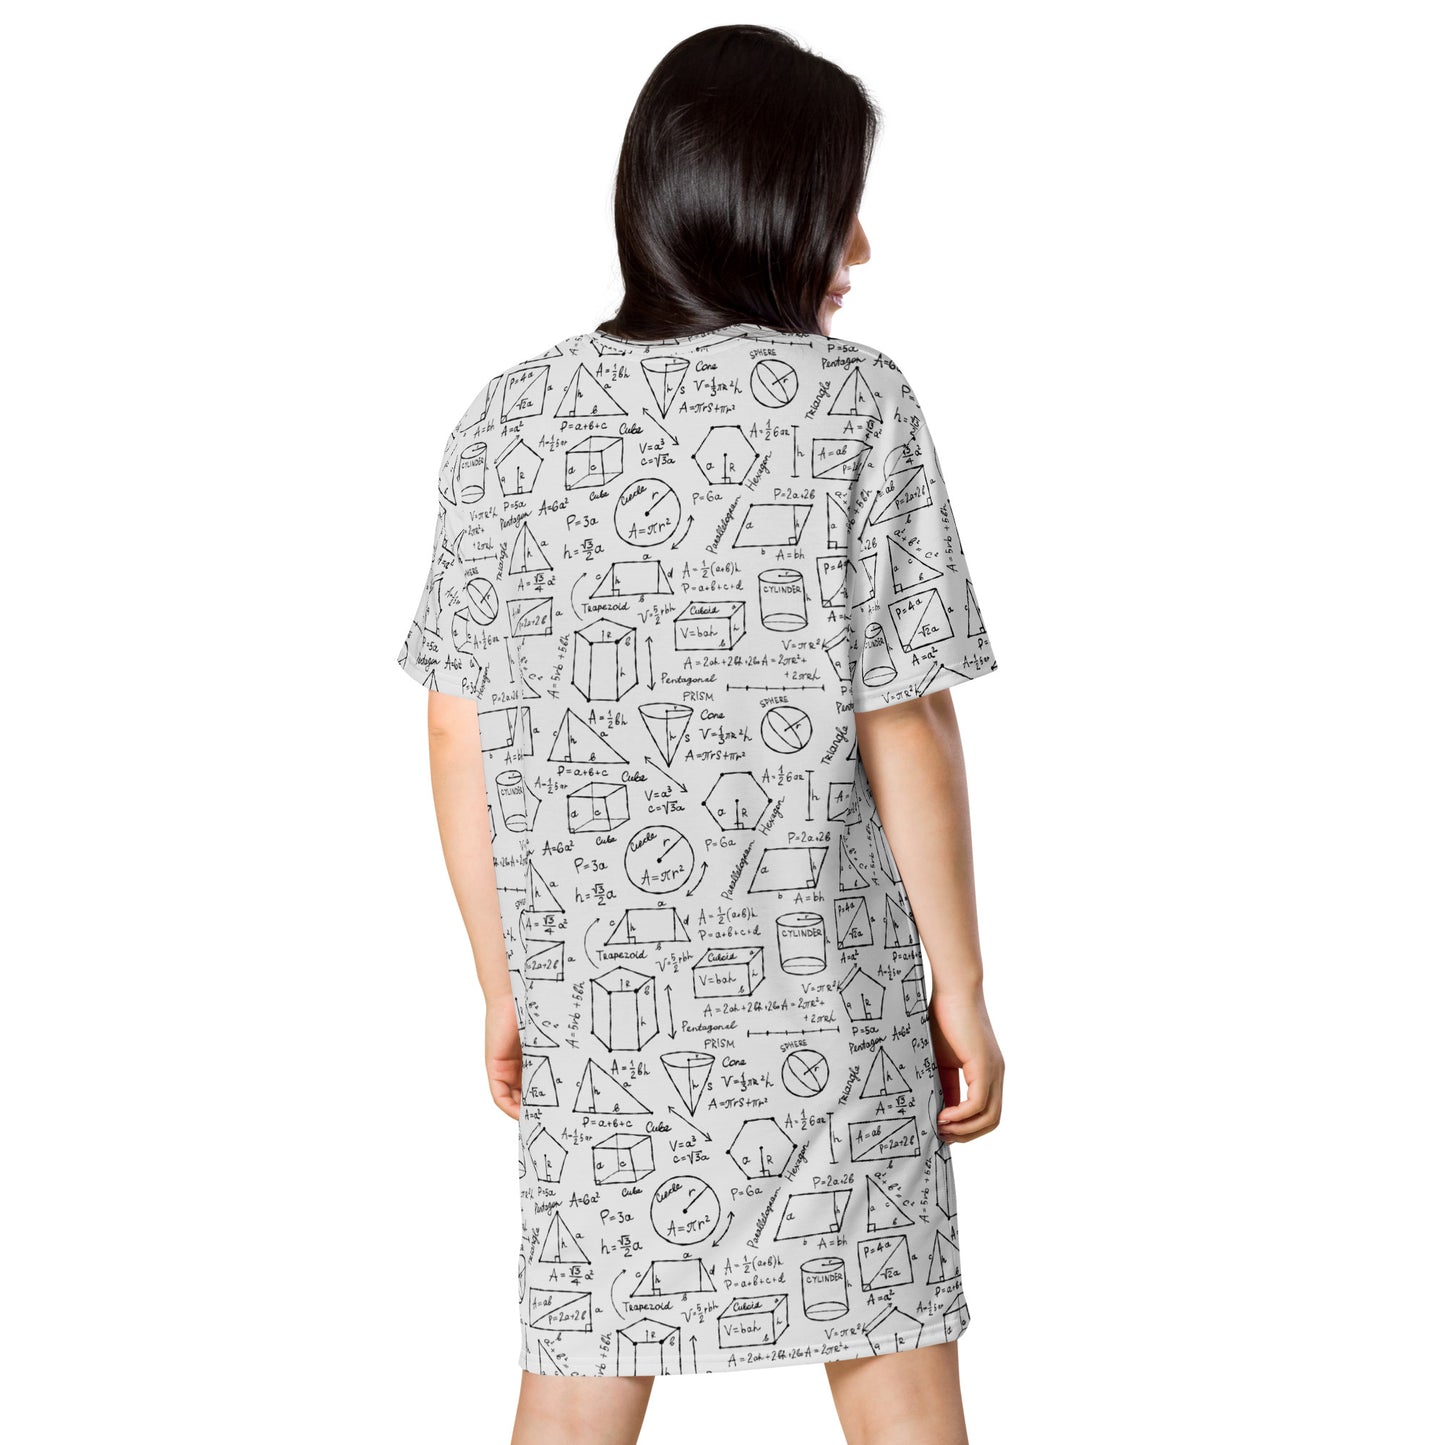 Personalised T-shirt dress light grey with Geometry Formulas. Basic text on dress - Geometry keeps you in shape. Back side